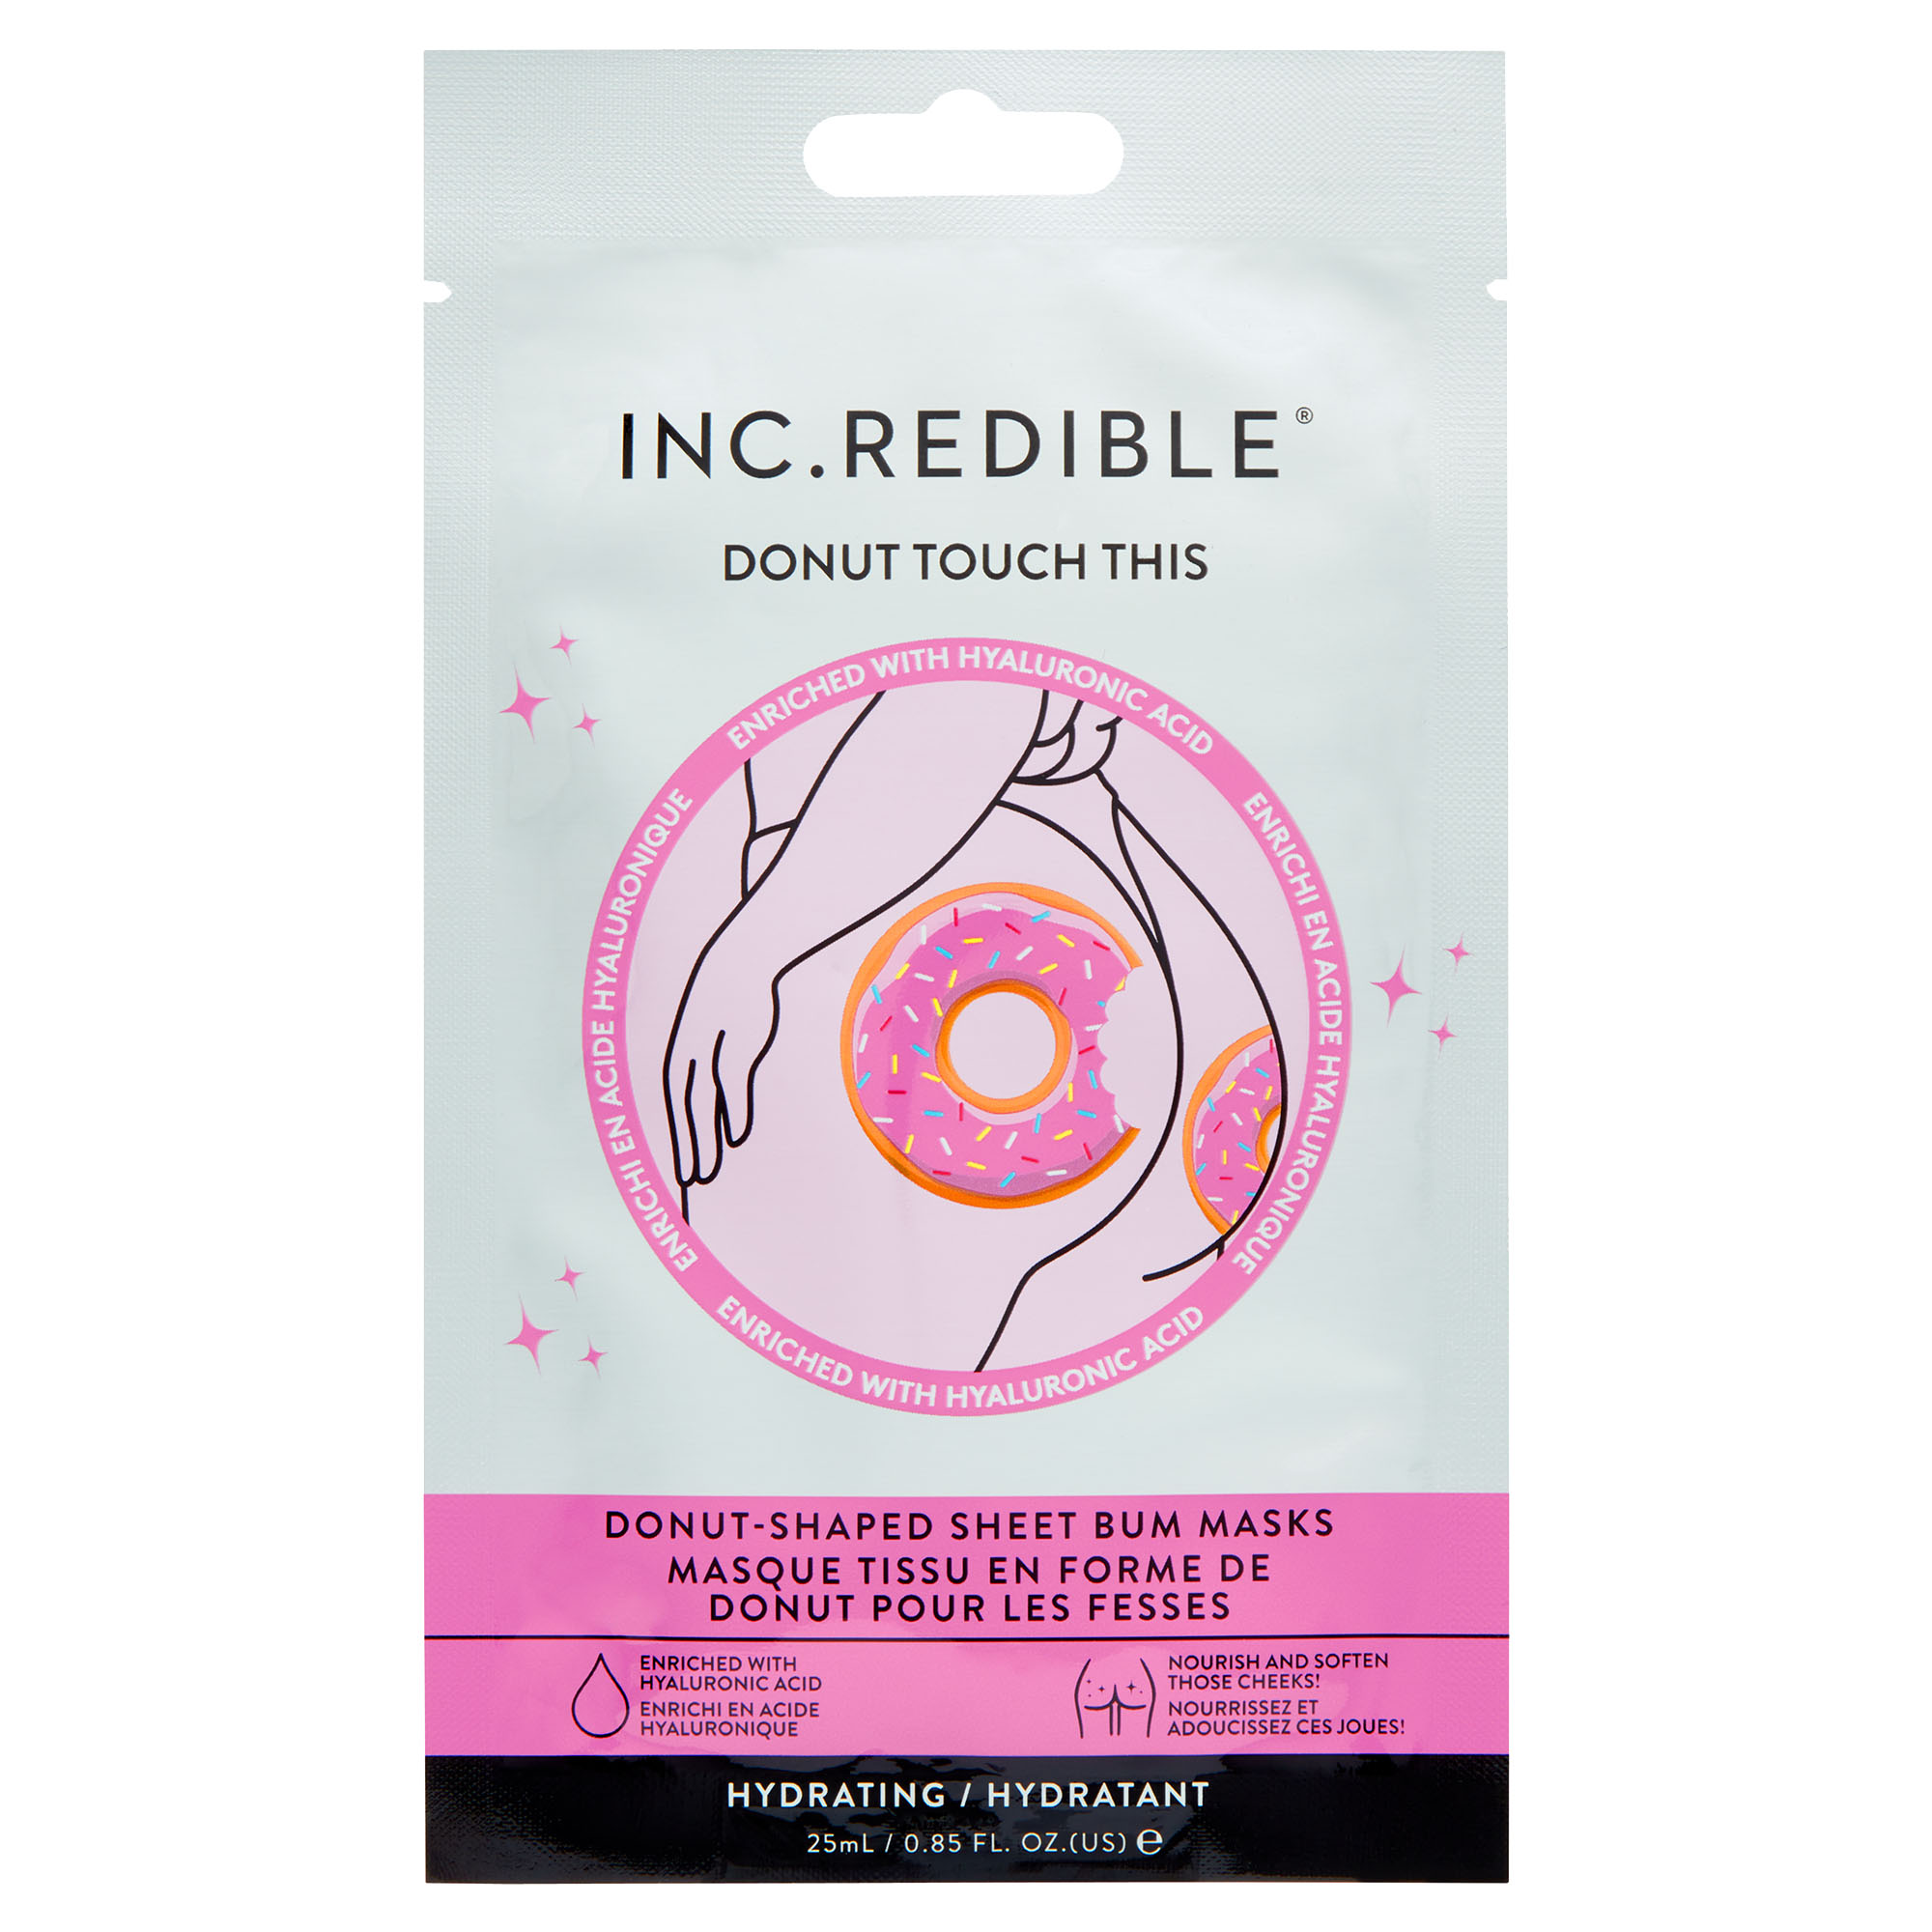 Inc.redible Donut Touch This Bum Masks